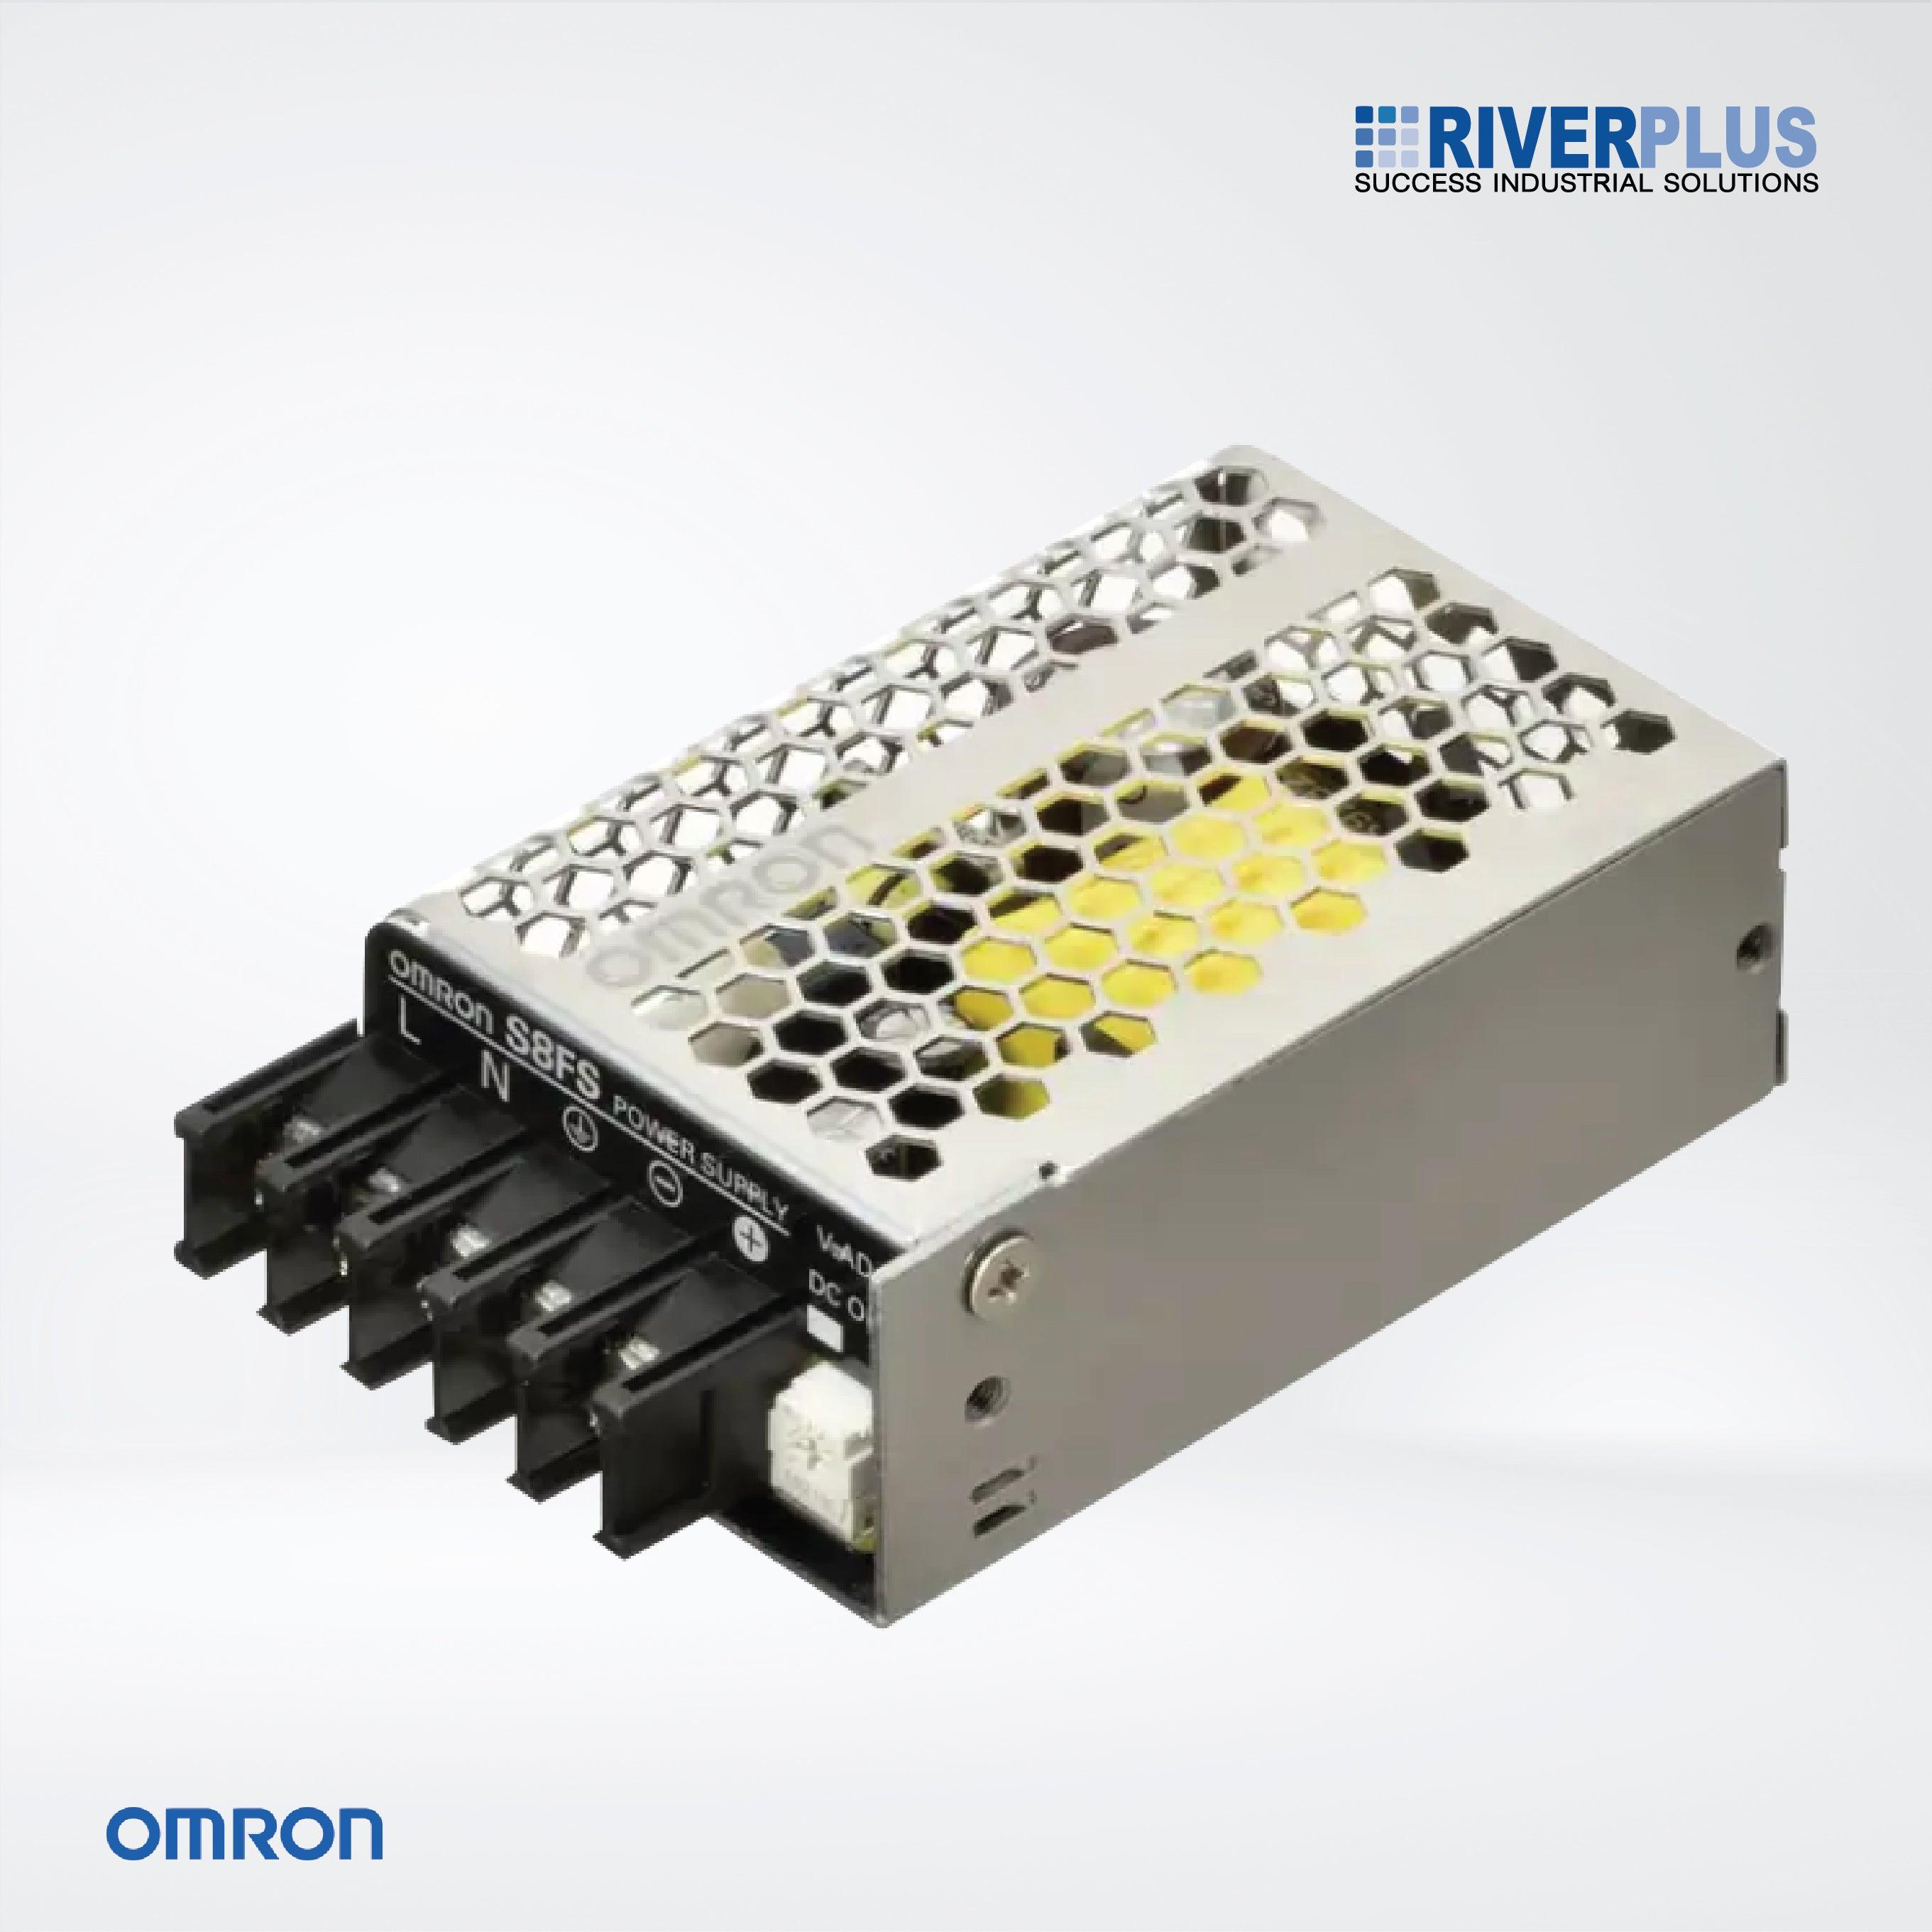 S8FS-C01505J Switch Mode Power Supply ,15 W , 5VDC ,Model with terminal block facing forward - Riverplus